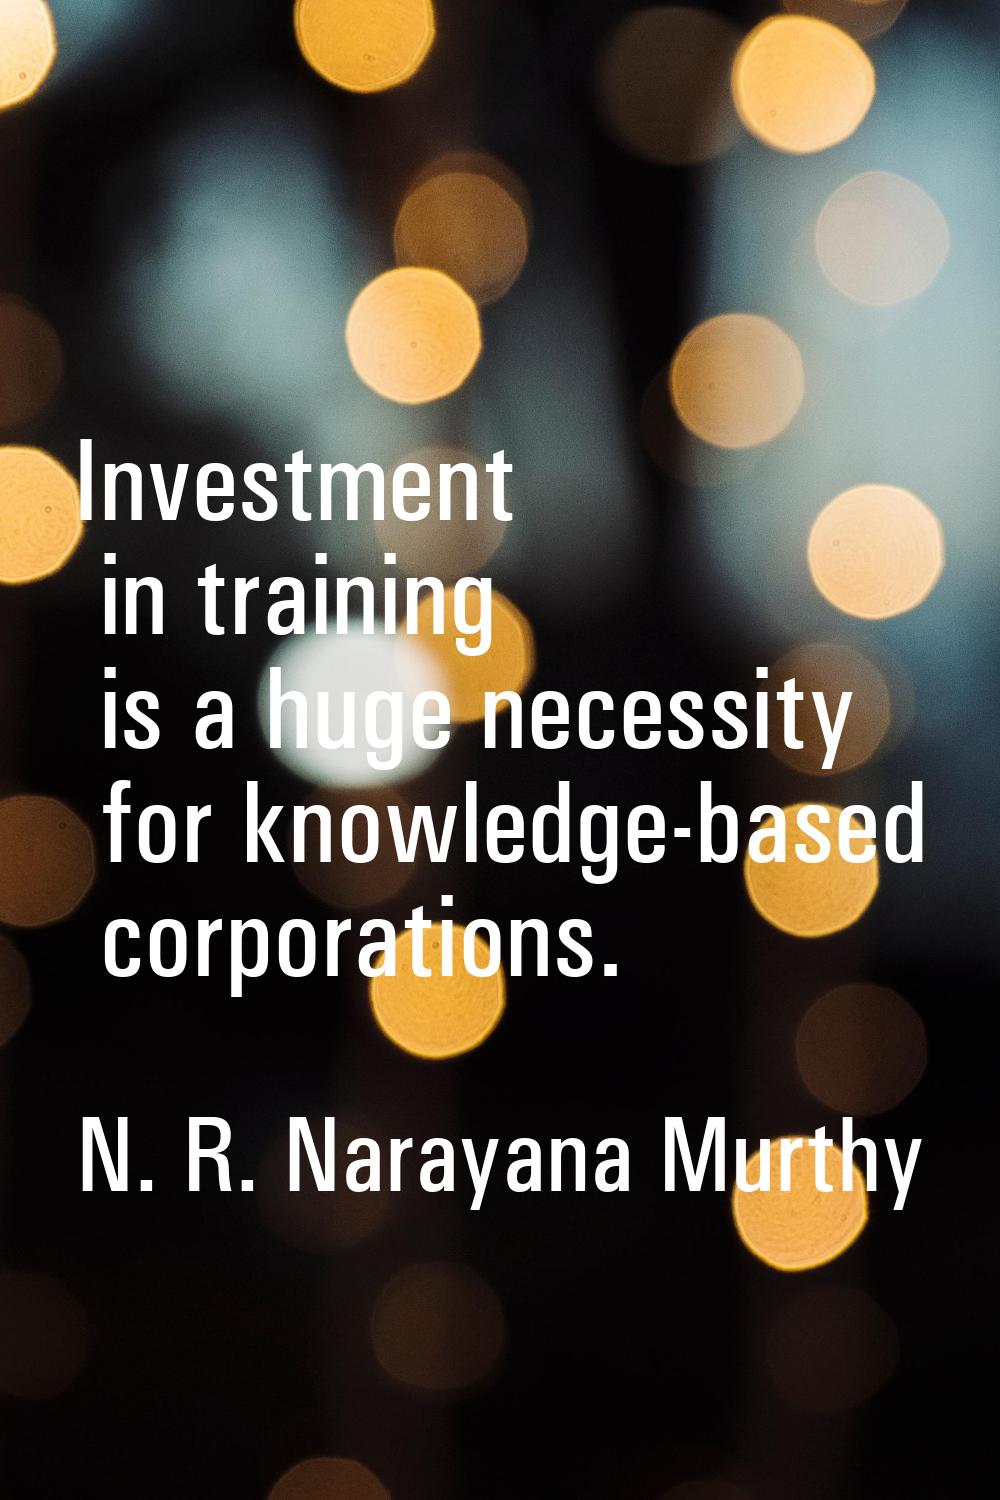 Investment in training is a huge necessity for knowledge-based corporations.